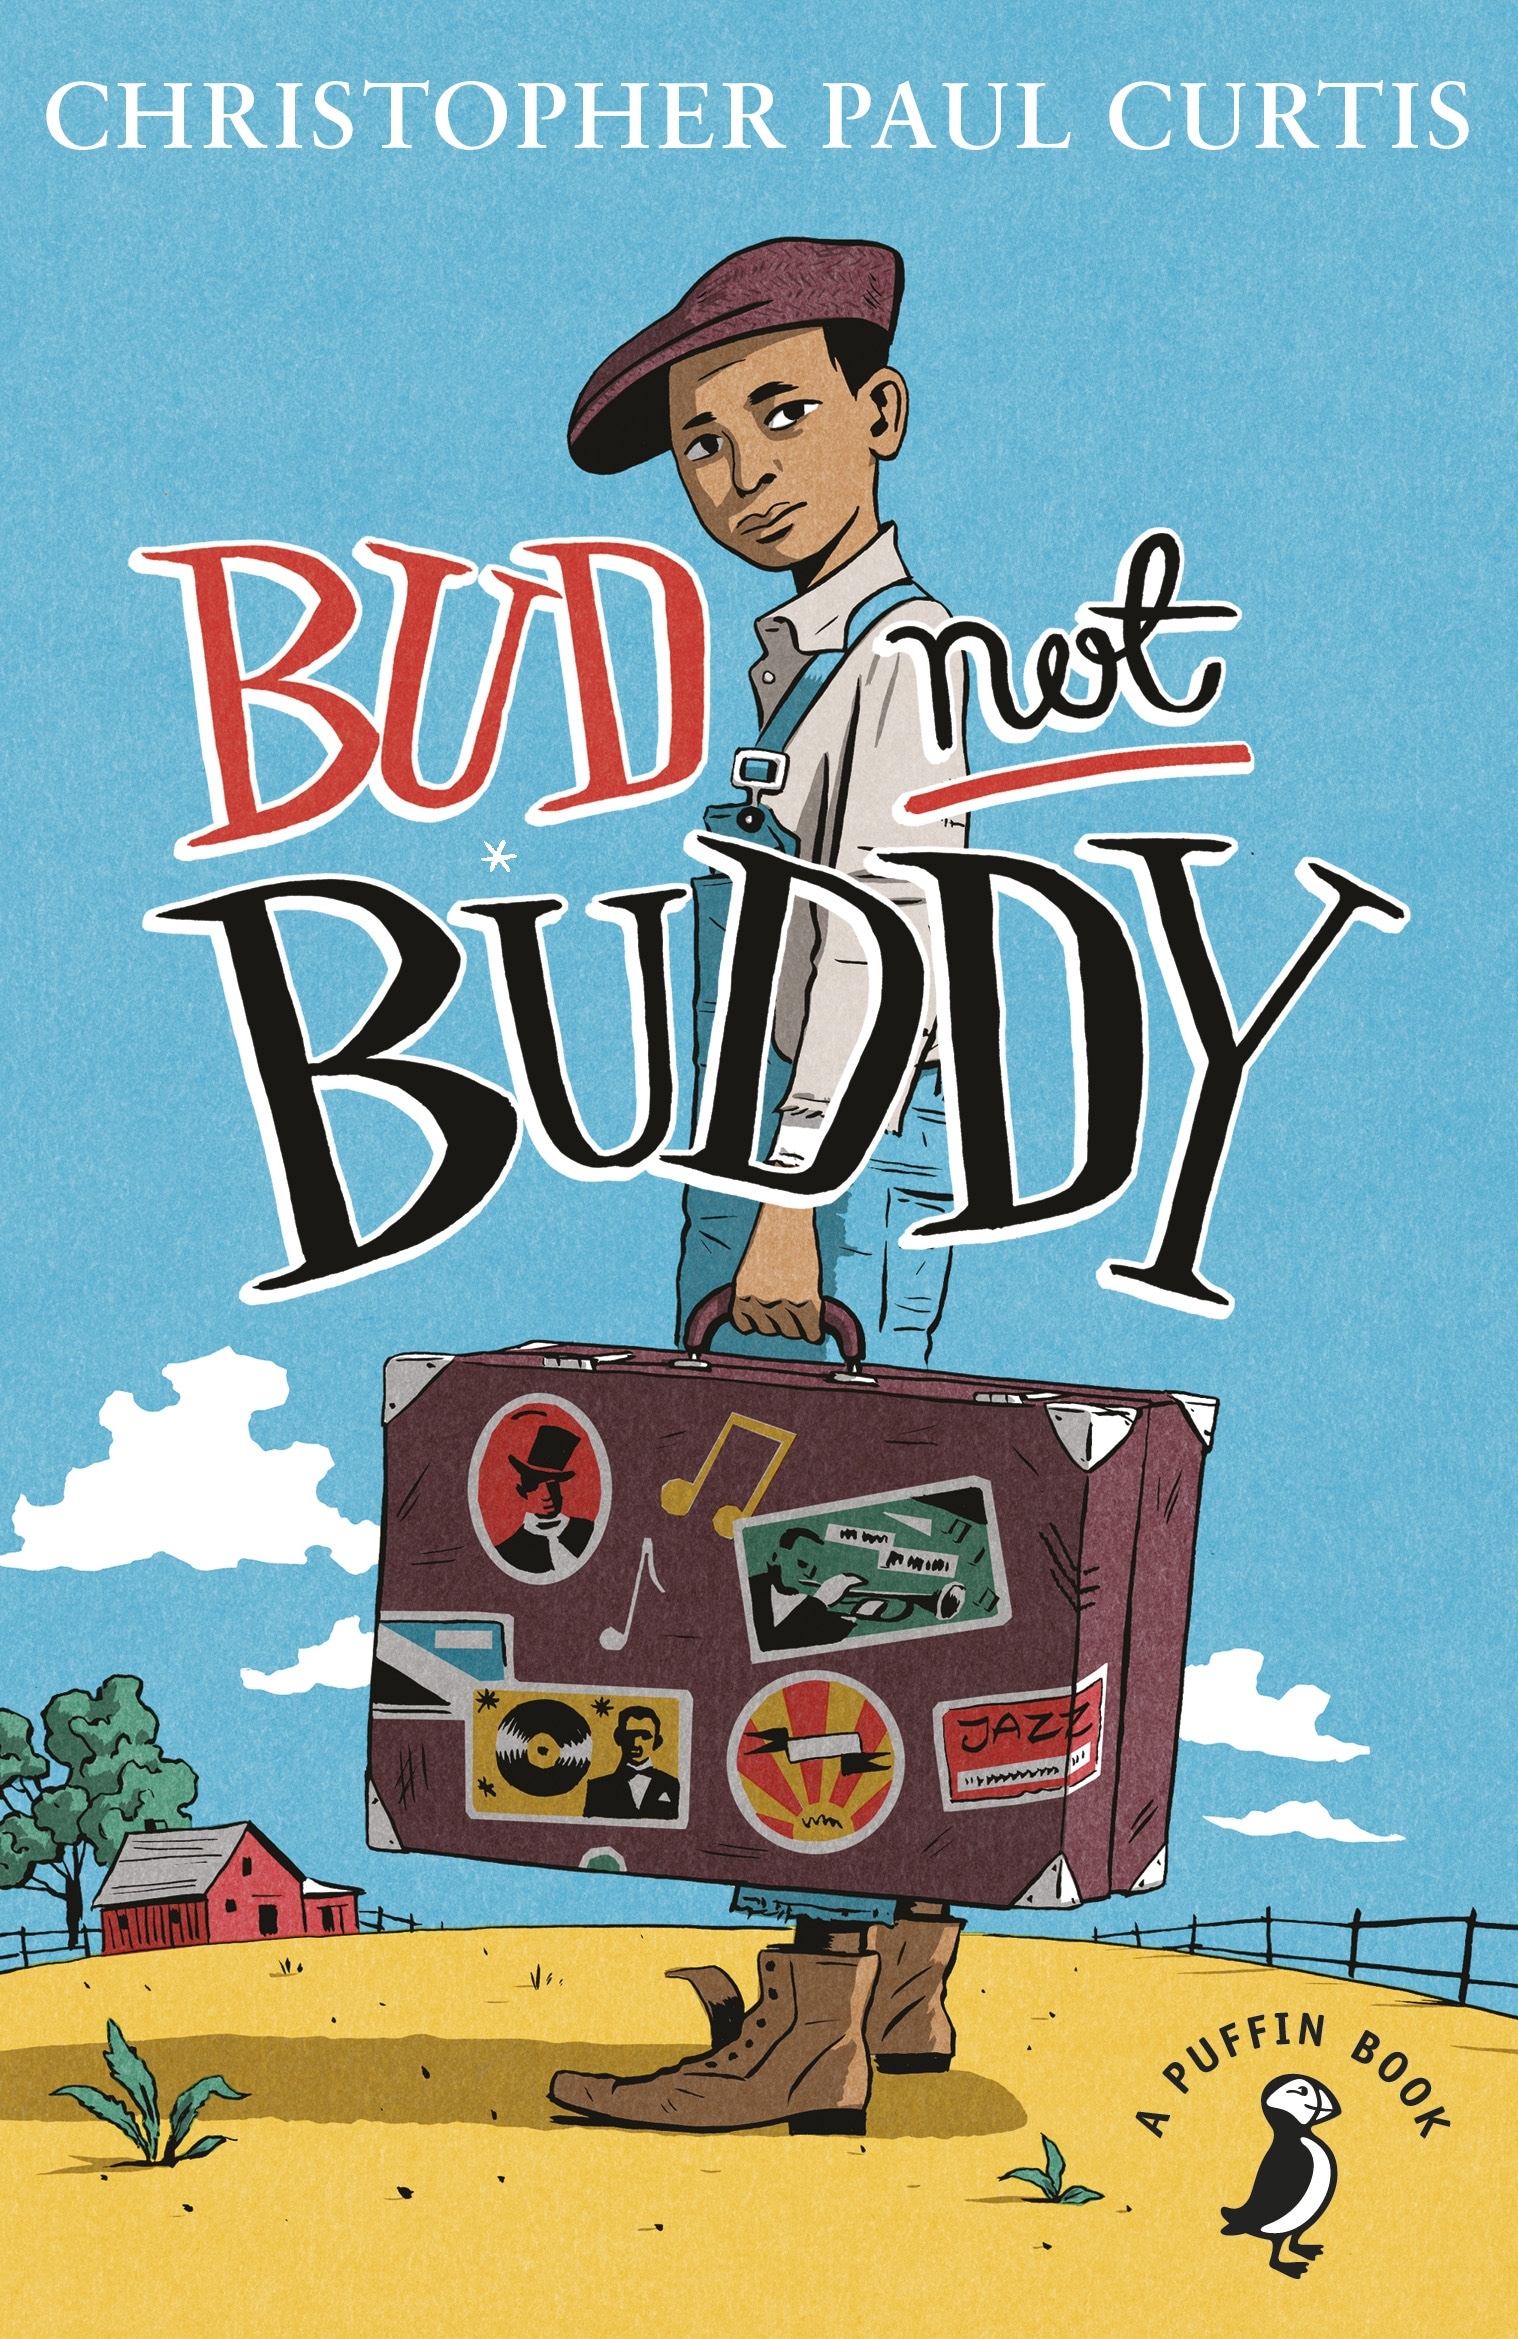 Book “Bud, Not Buddy” by Christopher Paul Curtis — June 6, 2019